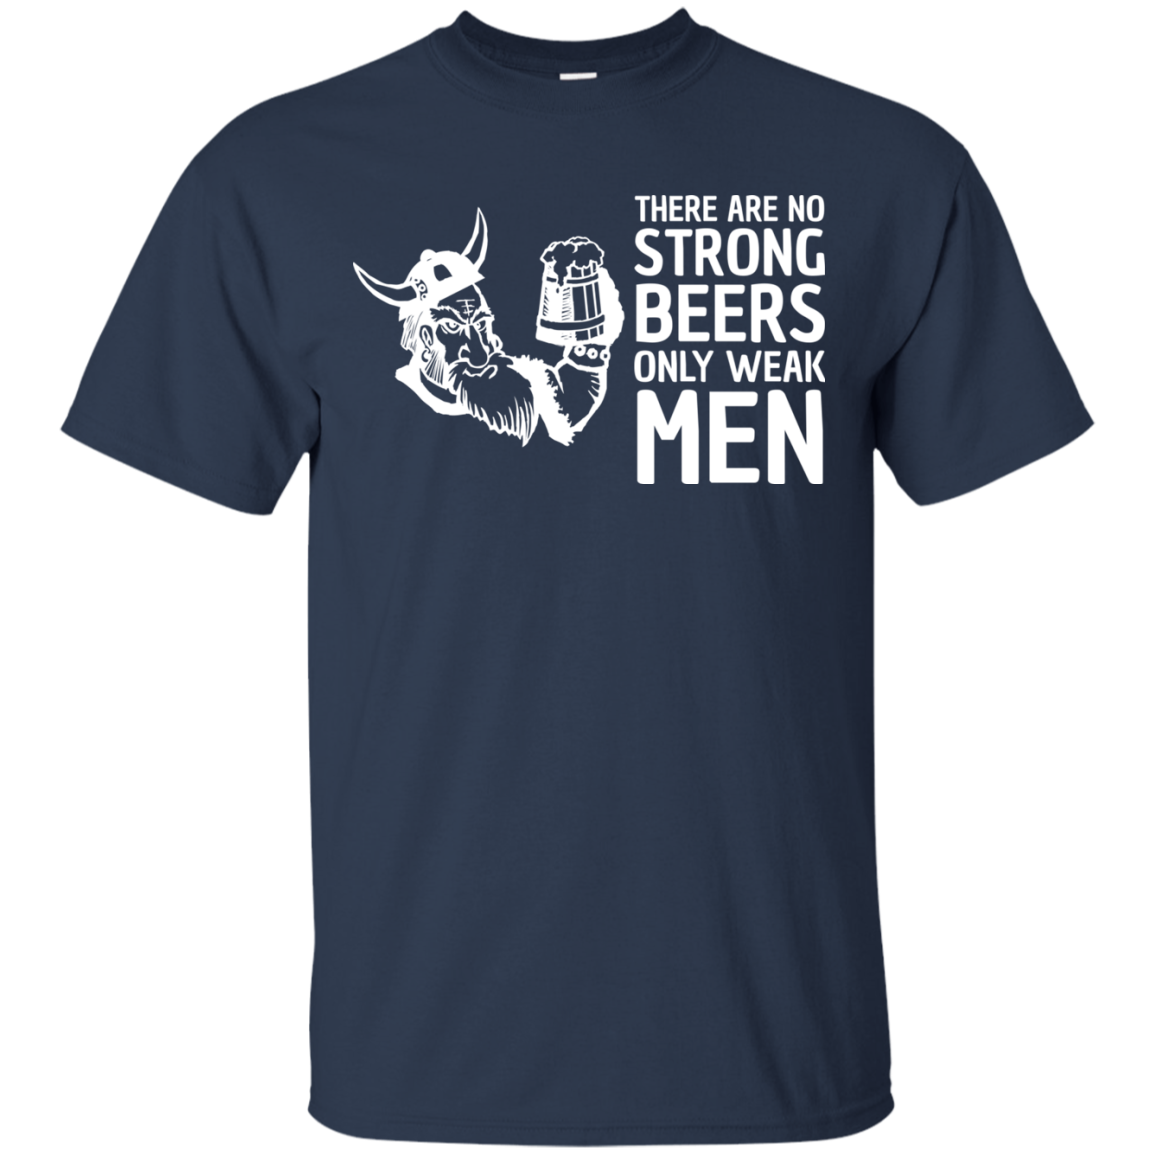 There Are No Strong Beers, Only Weak Men T-Shirt Apparel - The Beer Lodge